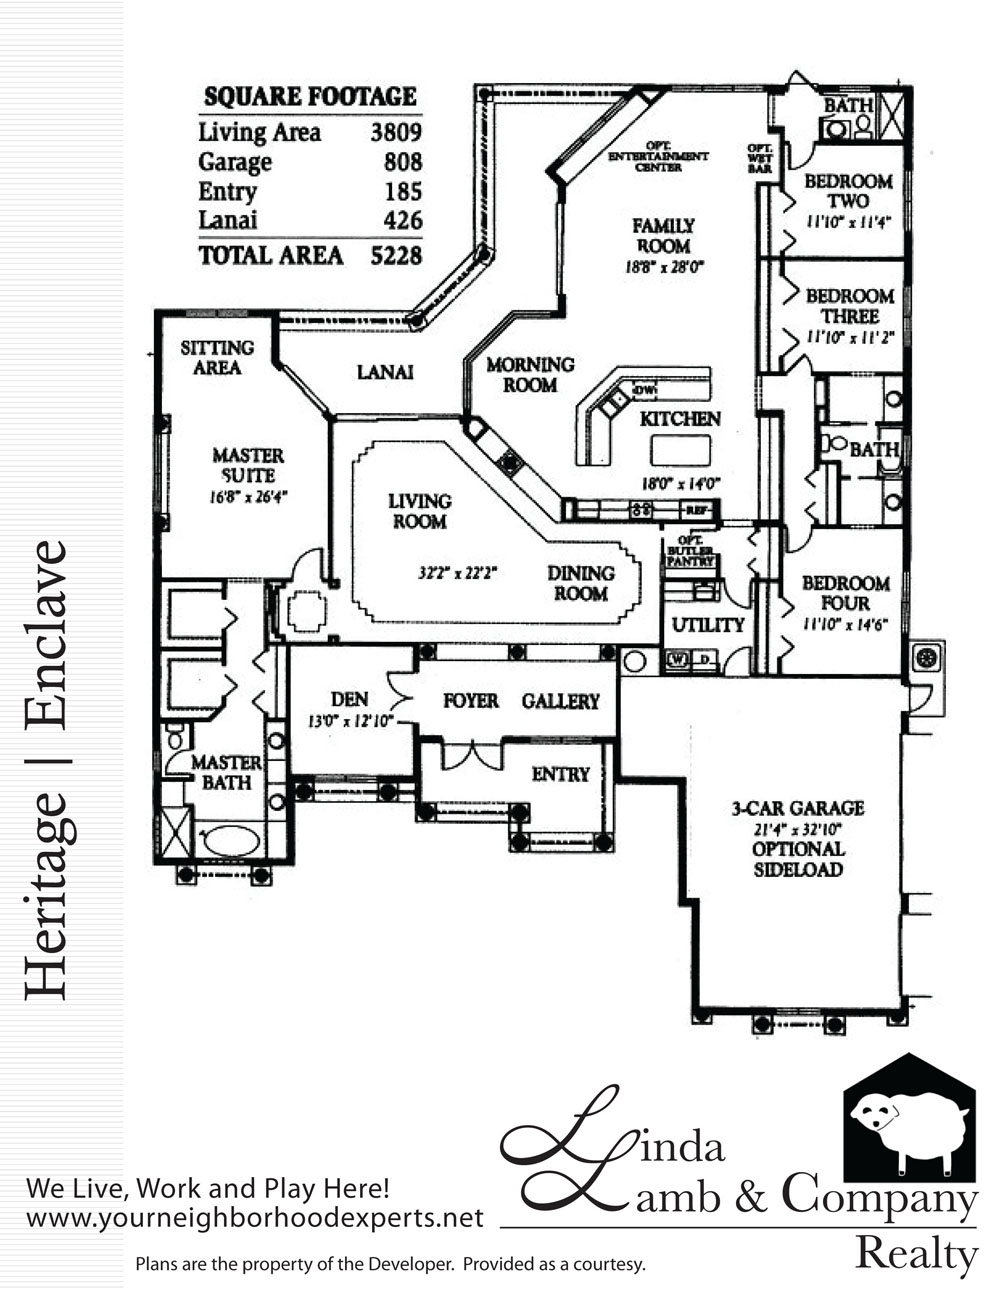 heritage floor plan enclave heritage palms florida fort myers linda lamb and company real estate